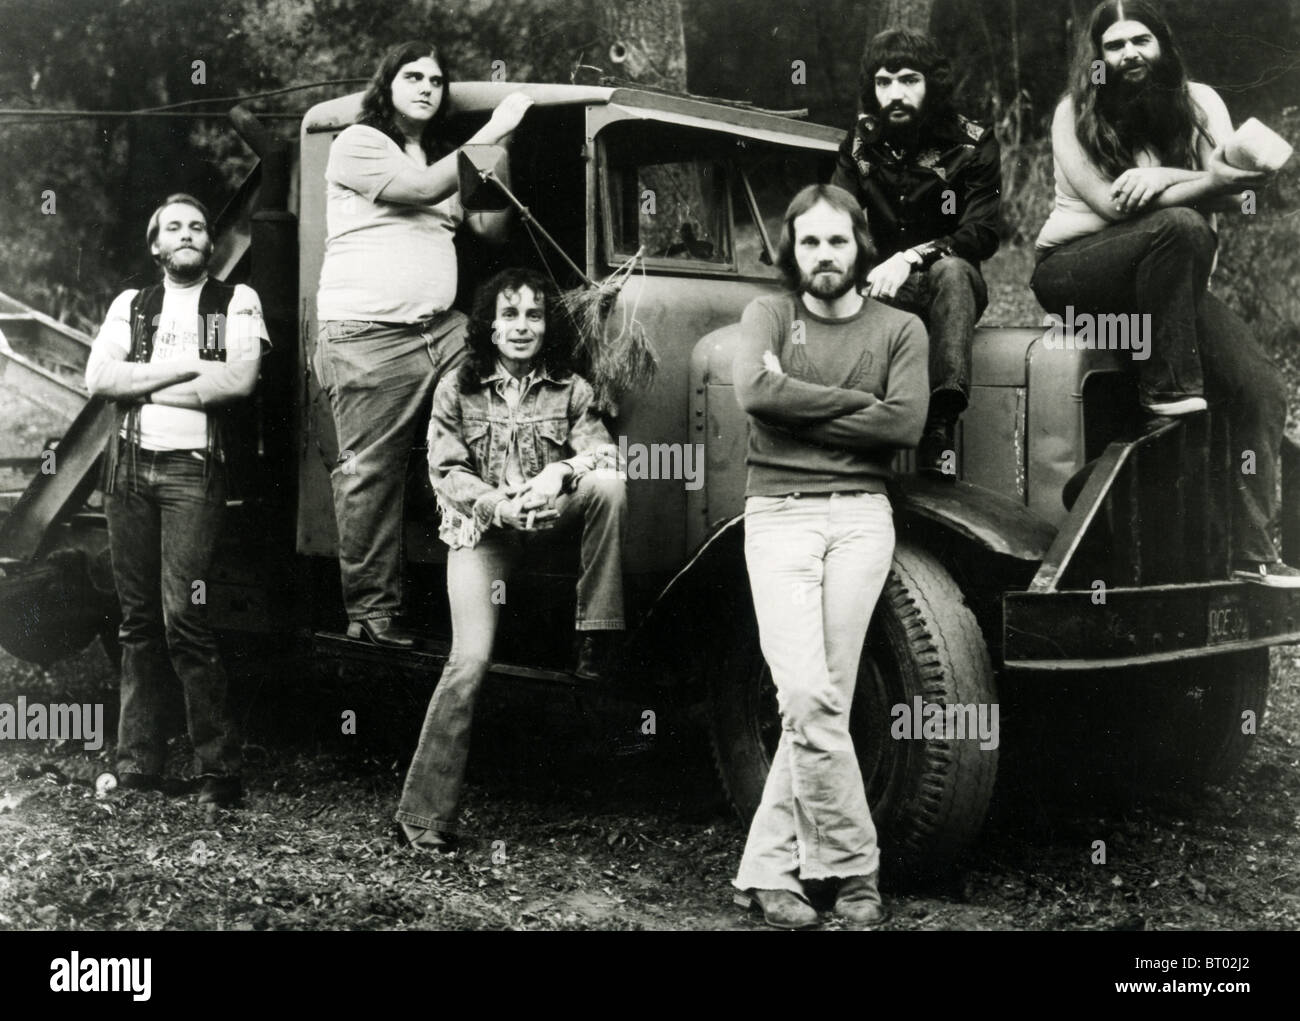 Canned heat steam фото 77